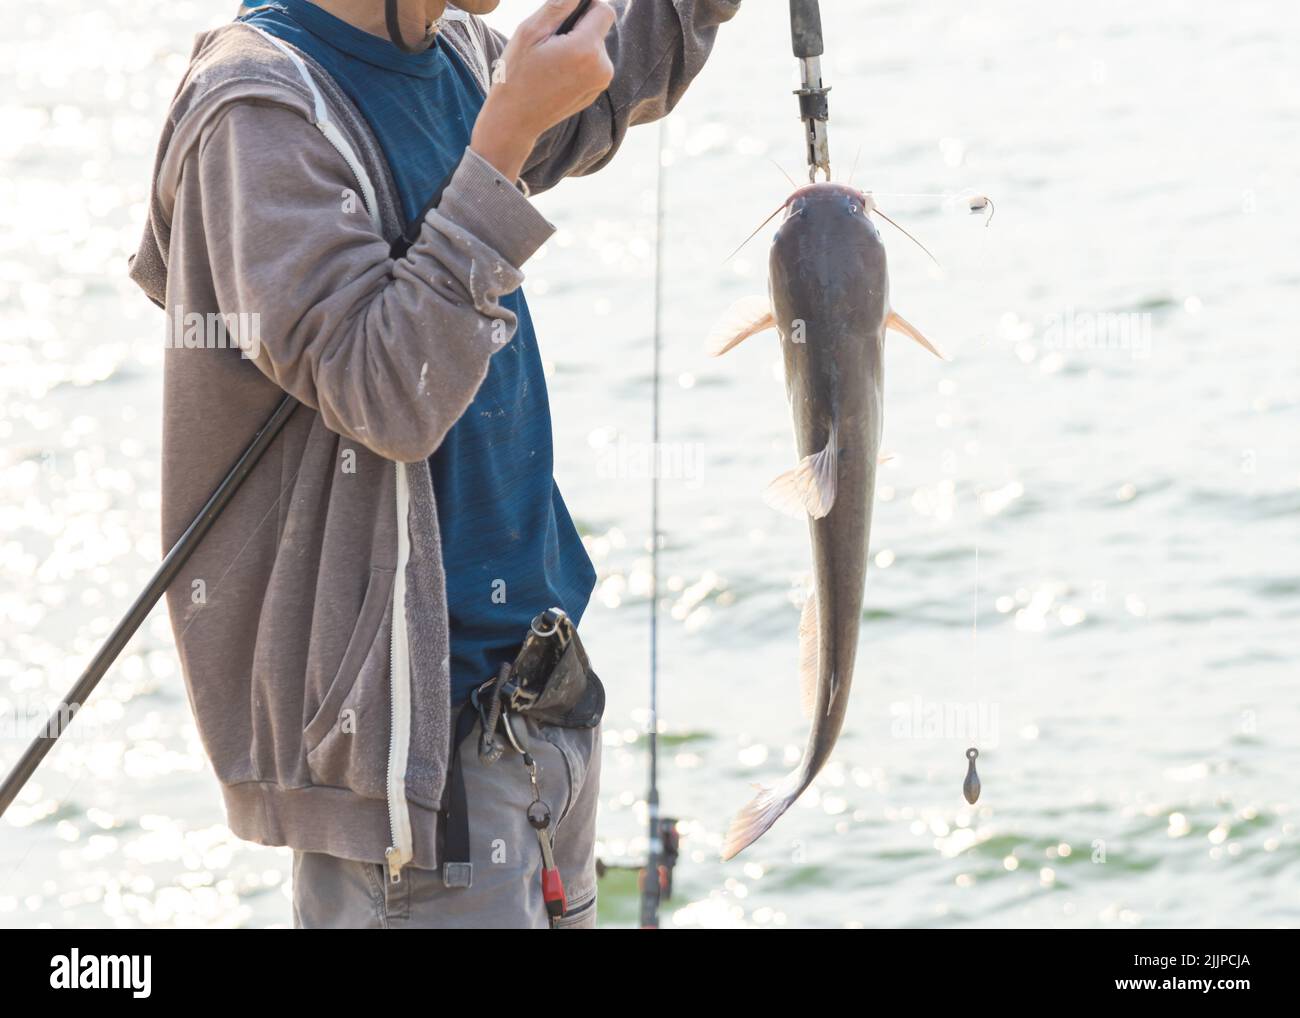 A close-up shot of a fisherman with a rod and a fish lip gripper catching the catfish near Lavon Lake, Texas, America Stock Photo